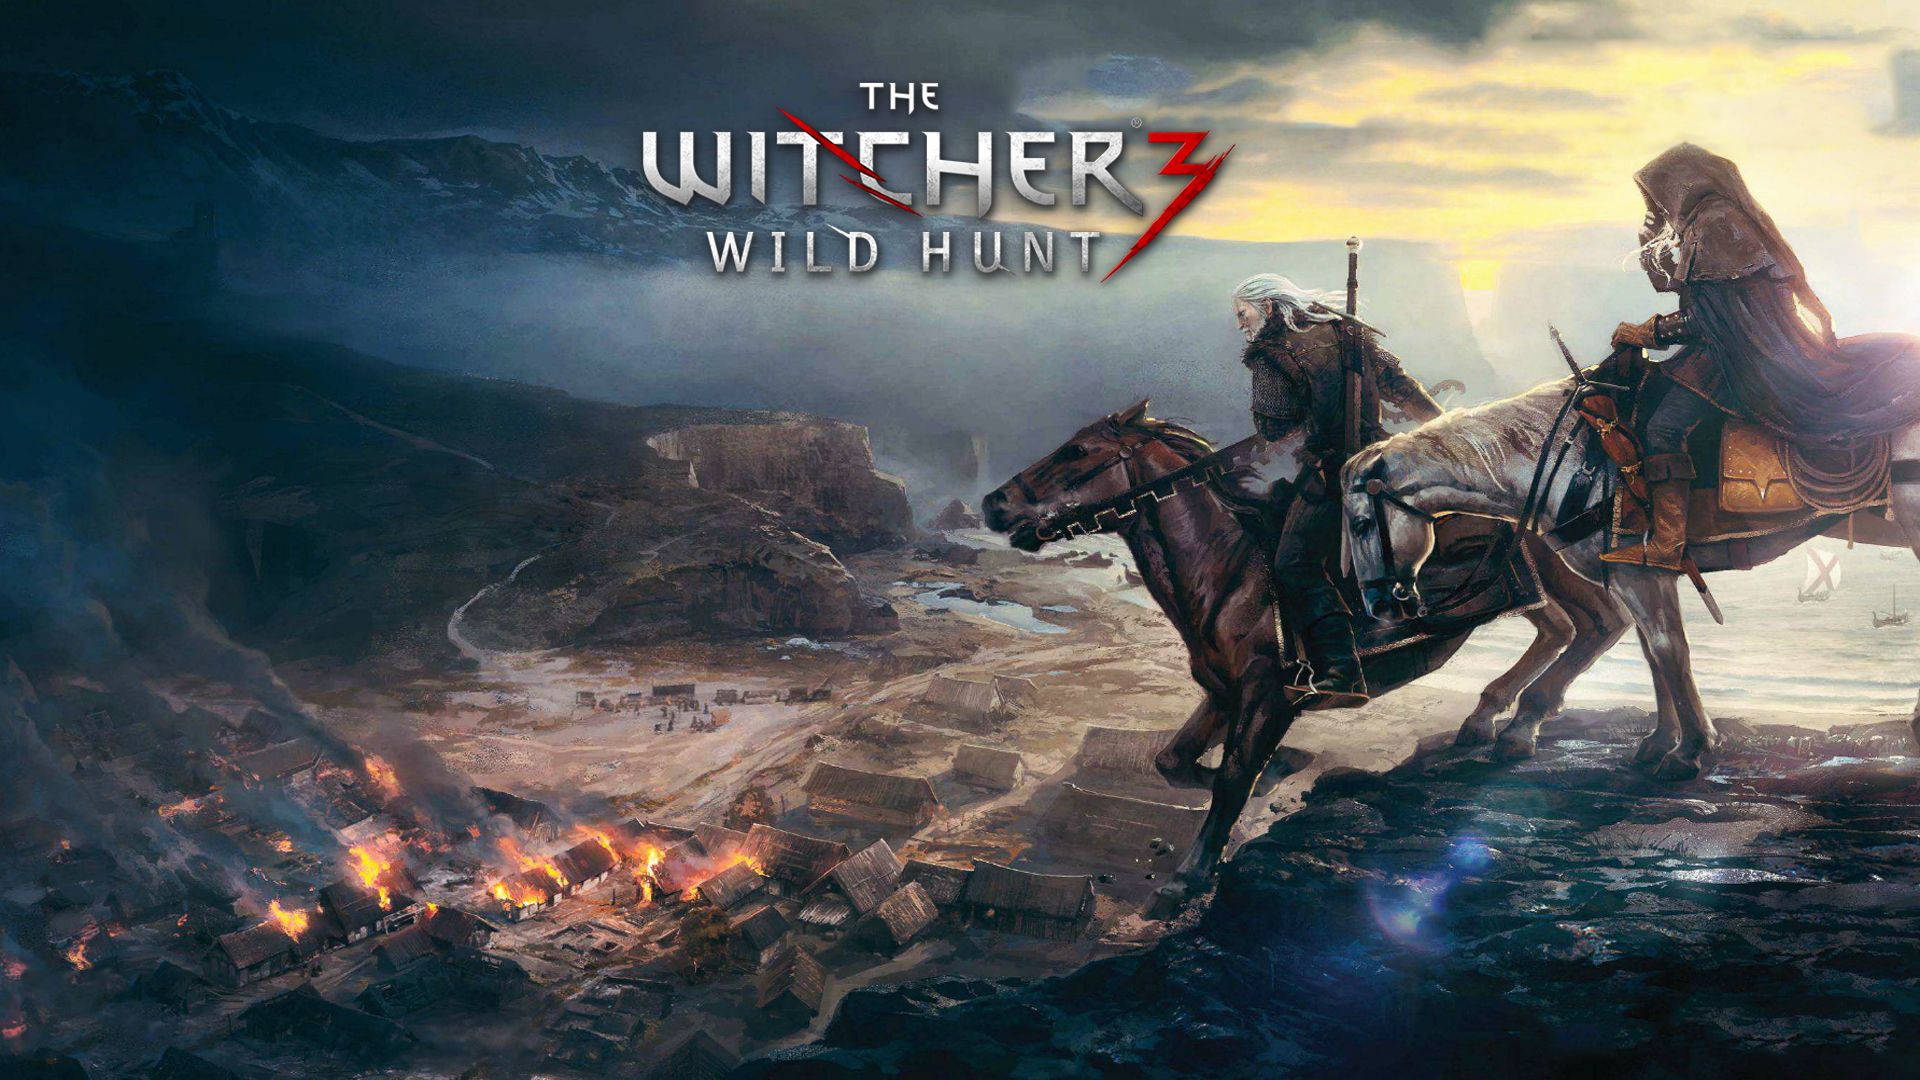 The Witcher 3 Wild Hunt - Pc - Pc - Pc - Pc - Pc Background